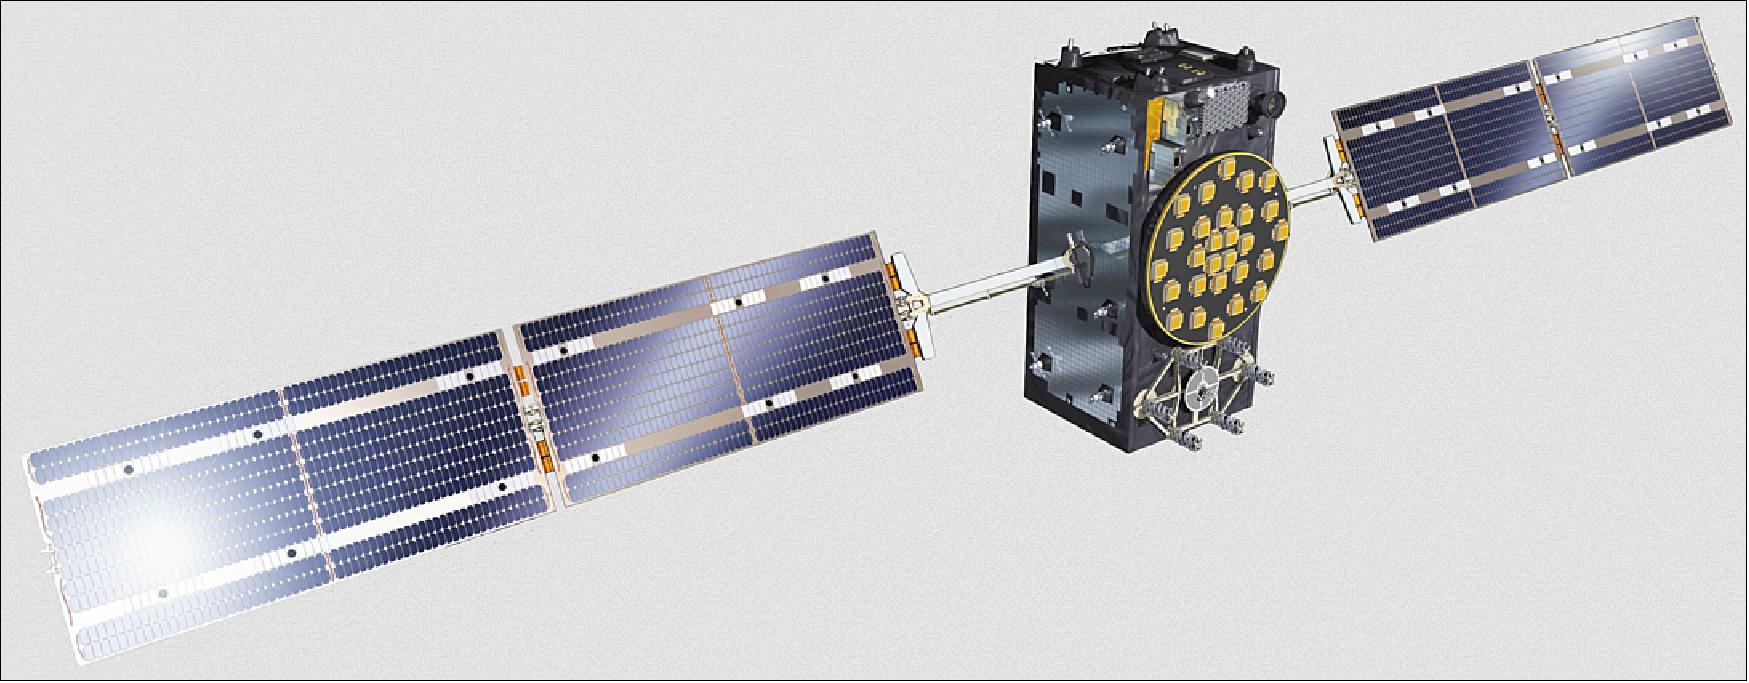 Figure 7: Artist's view of a Galileo FOC (Full Operational Capability) satellite. The complete Galileo constellation will consist of 24 satellites along three orbital planes in MEO (Medium Earth Orbit, plus two spares per orbit). The result will be Europe’s largest ever fleet of satellites, operating in the new environment of MEO (image credit: ESA, Pierre Carril)